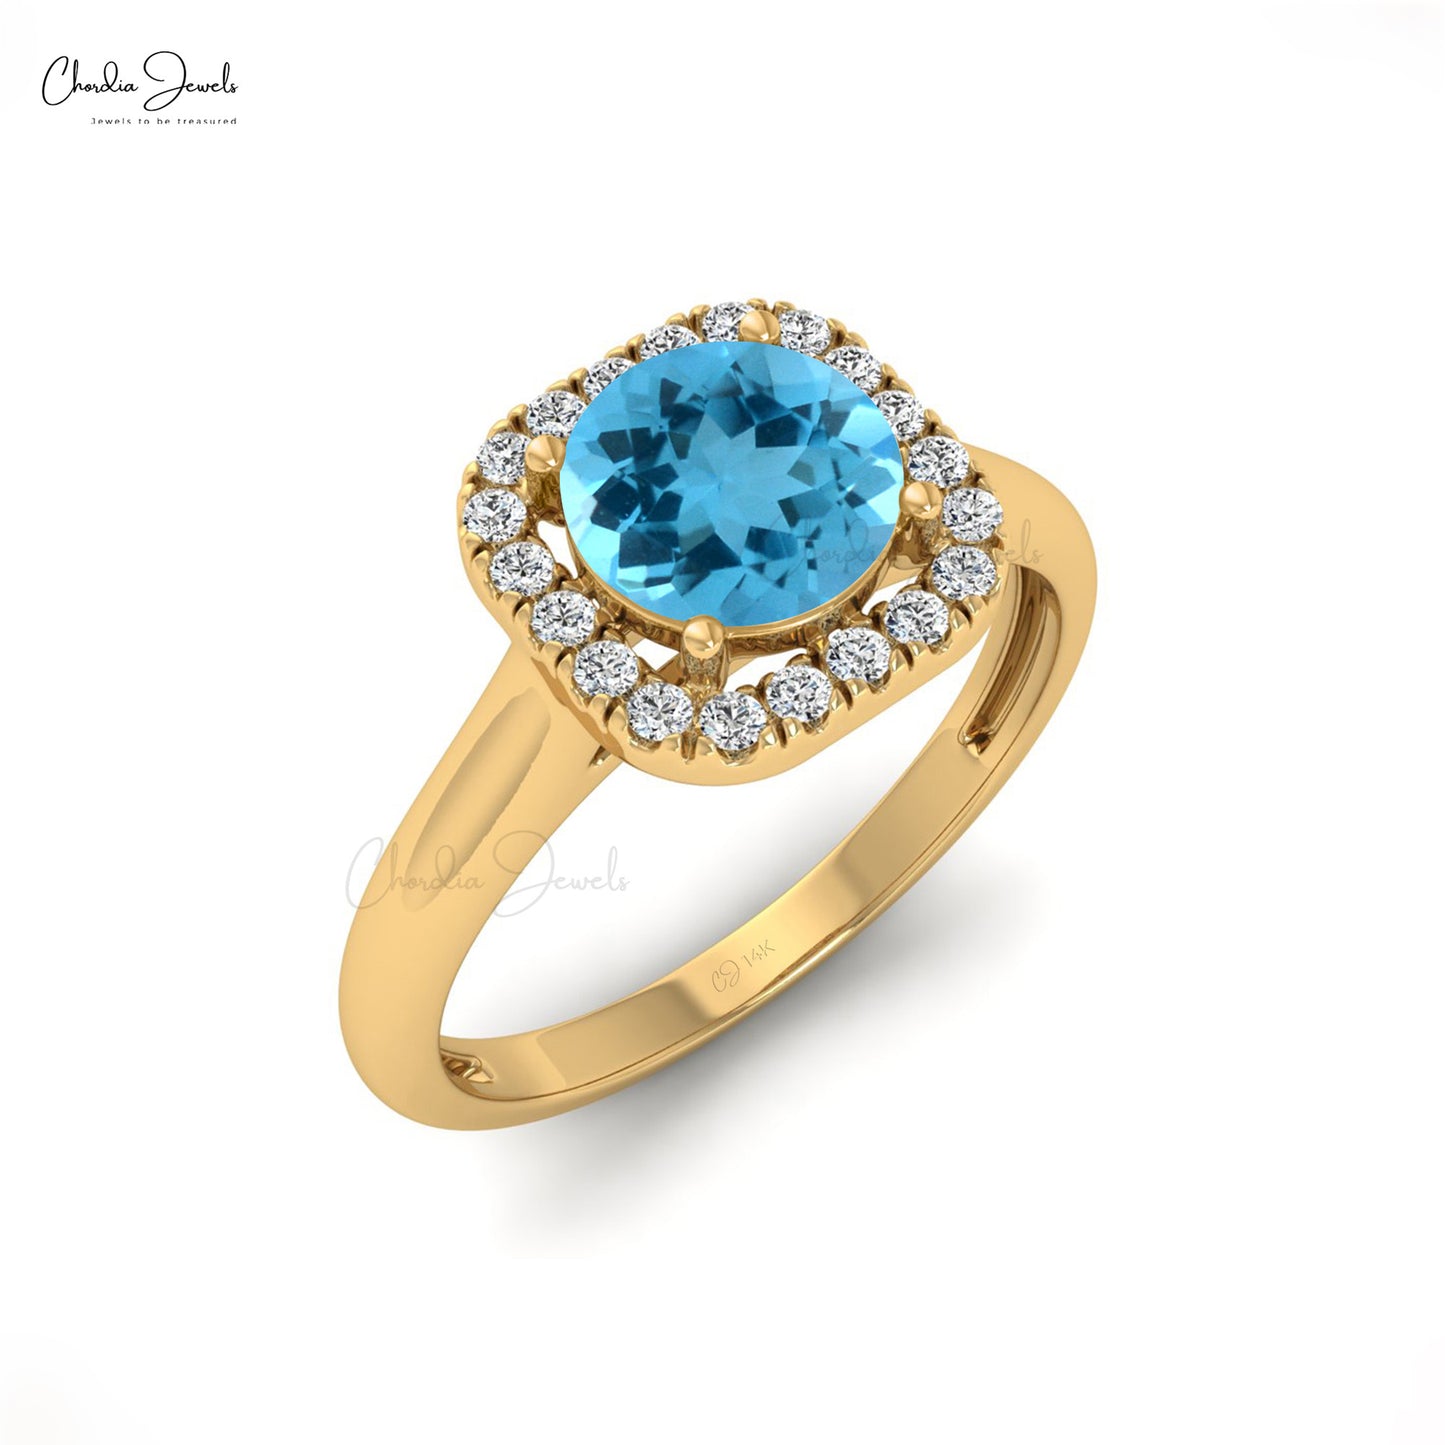 Load image into Gallery viewer, 14k Solid Gold Natural Gemstone and Diamond Halo Ring, 6mm Round Cut Swiss Blue Topaz Dainty Ring For Wedding Gift
